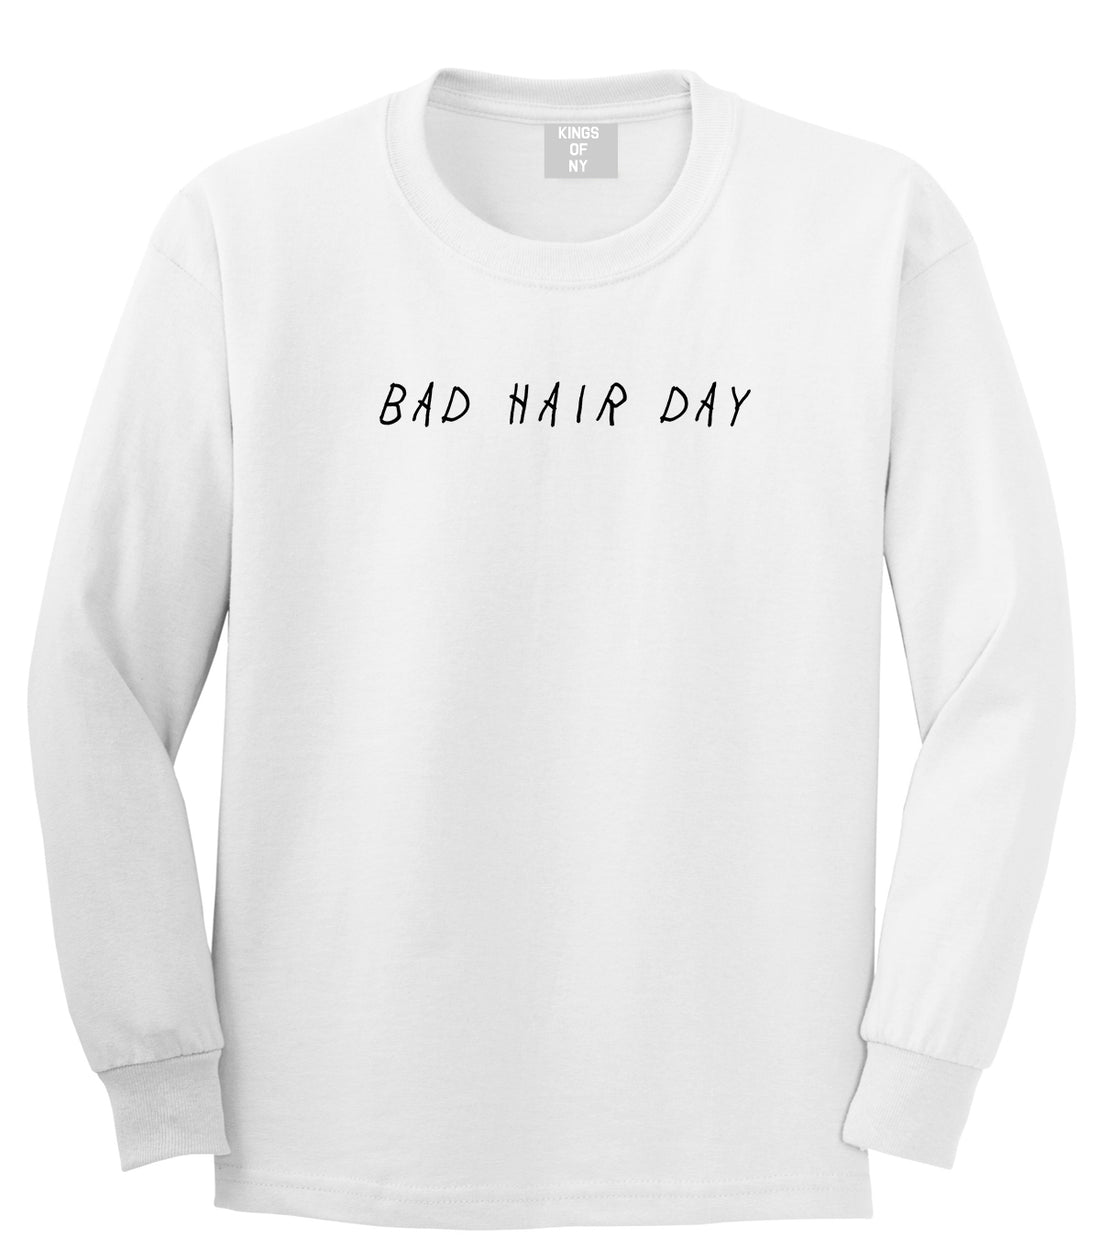 Bad Hair Day White Long Sleeve T-Shirt by Kings Of NY